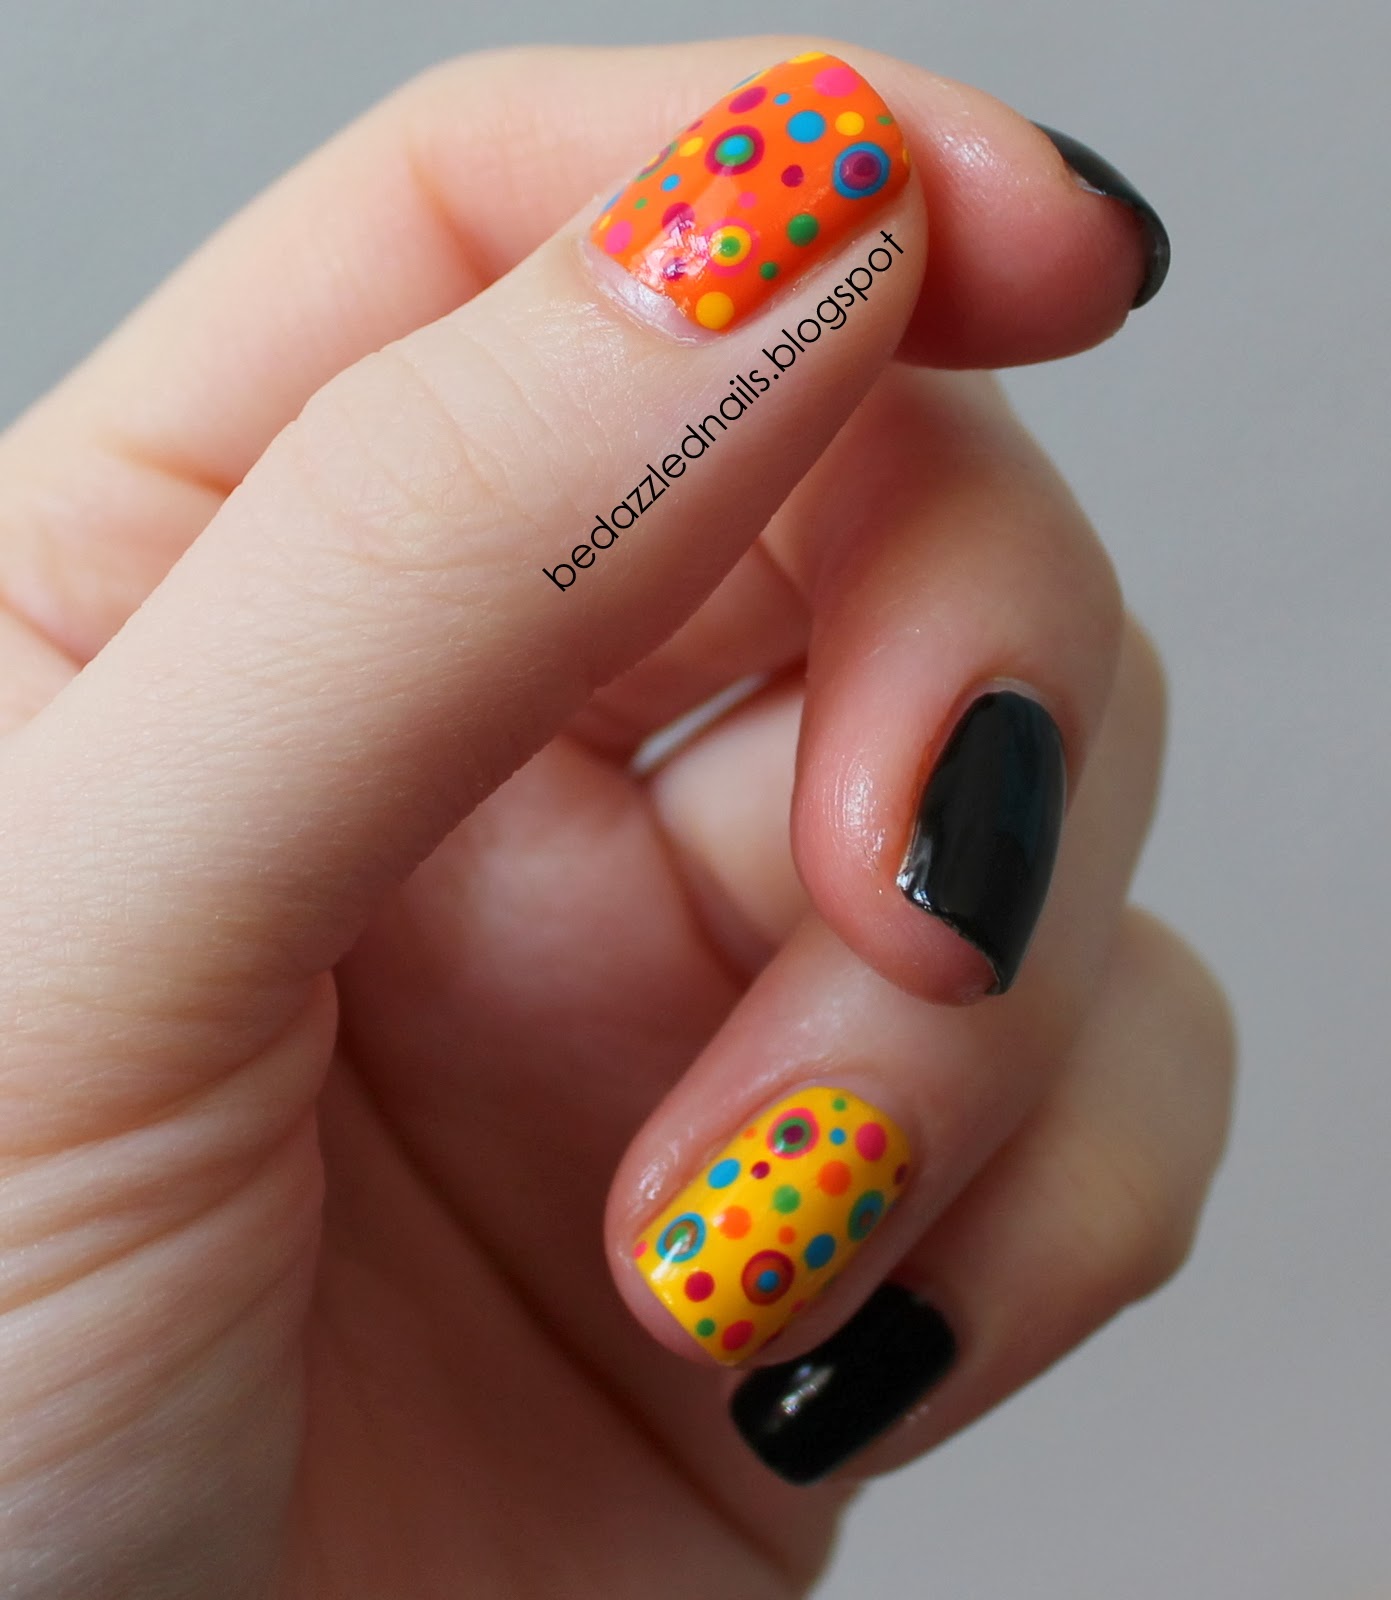 Bedazzled Nails: Crazy for Polka Dots